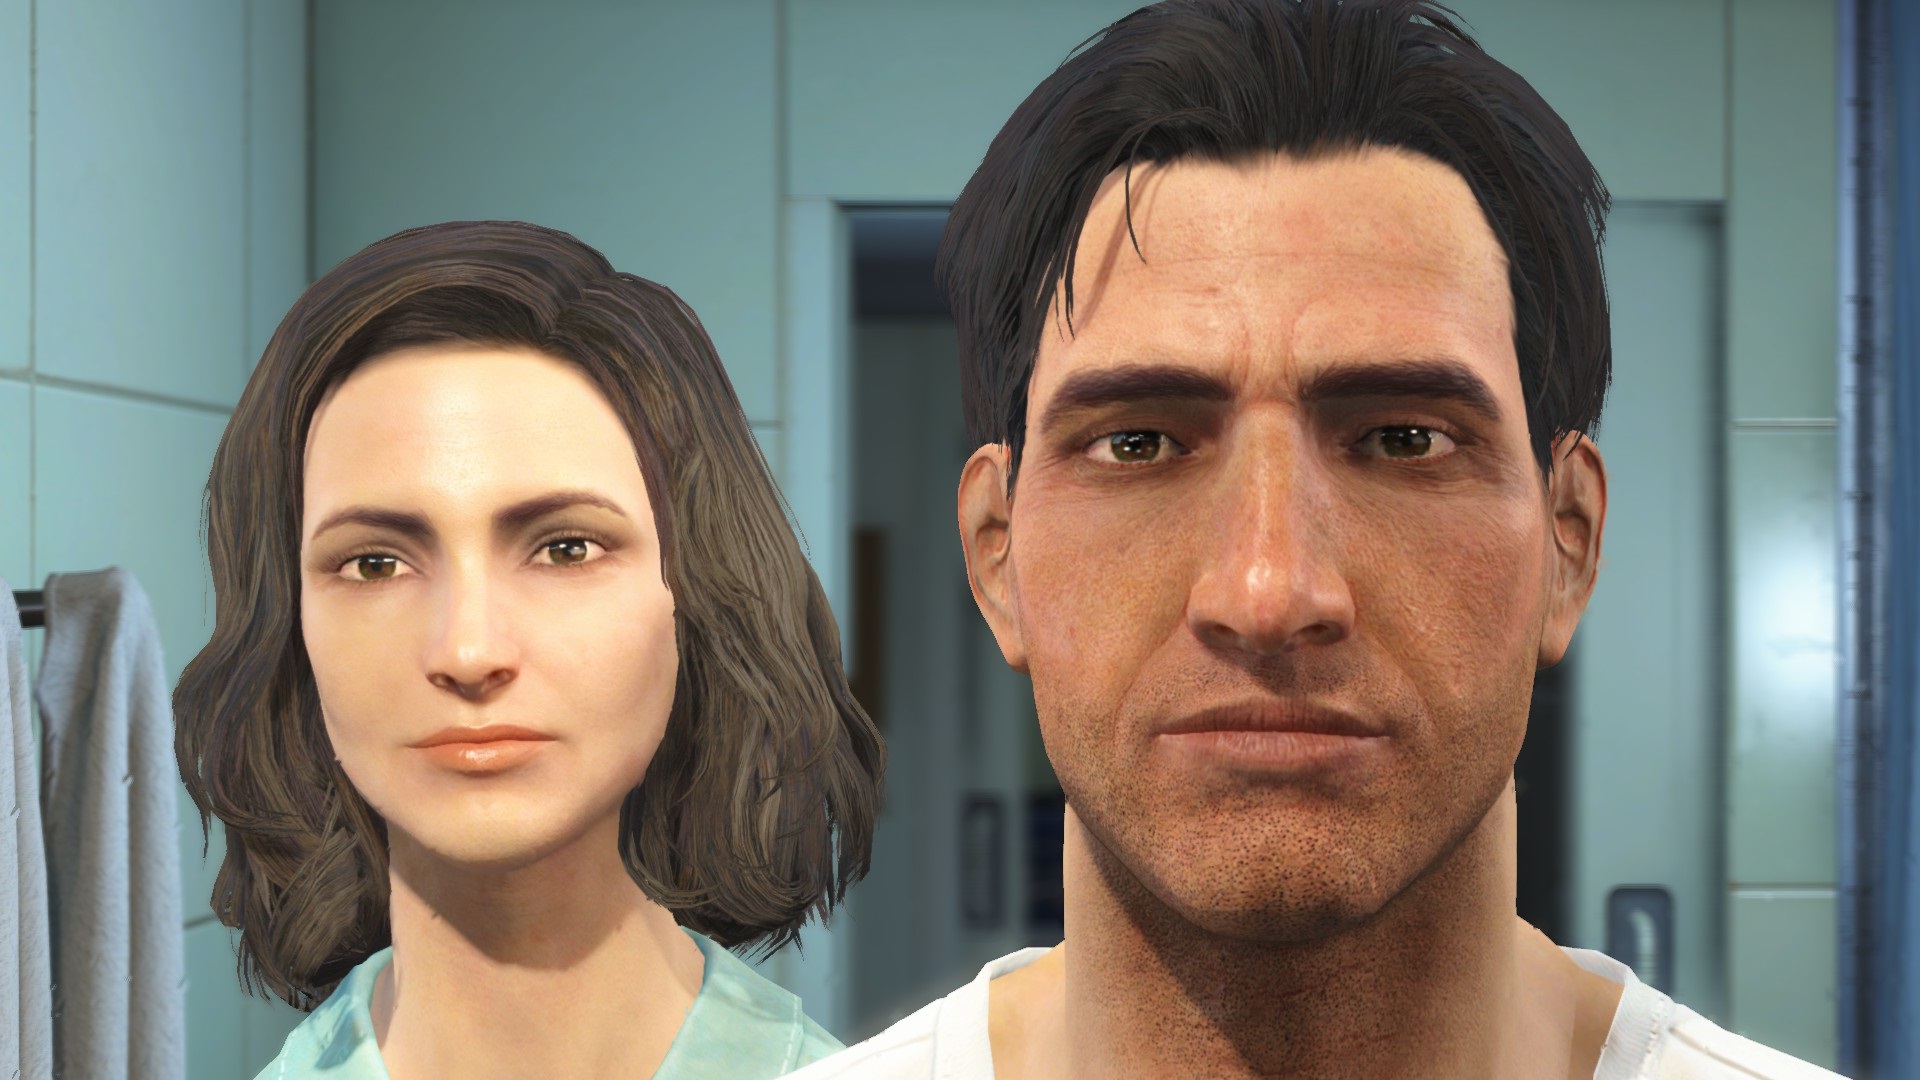 Fallout 4's 'next gen' update is nearly 16 gigs, breaks modded saves, and doesn't seem to change much at all